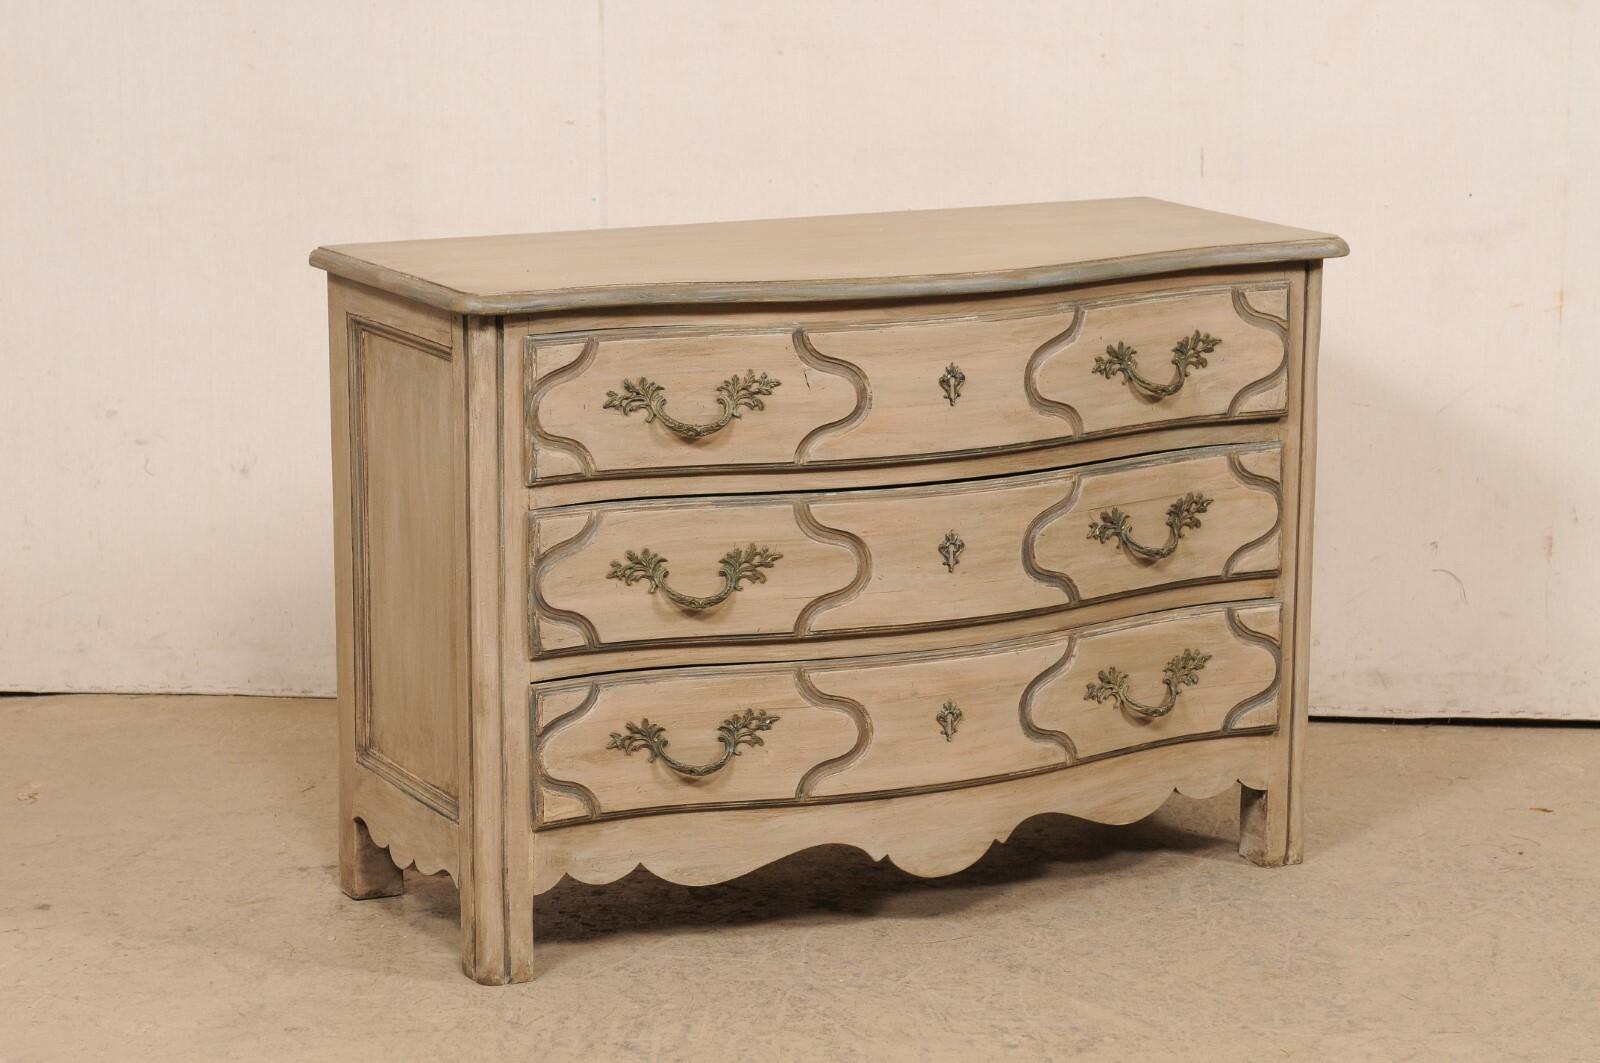 An Italian painted wood chest of drawers from the mid 20th century. This vintage bureau from Italy has a softly curved serpentine front, with case housing three full-sized drawers, a beautifully scalloped skirt along three sides, and presented on